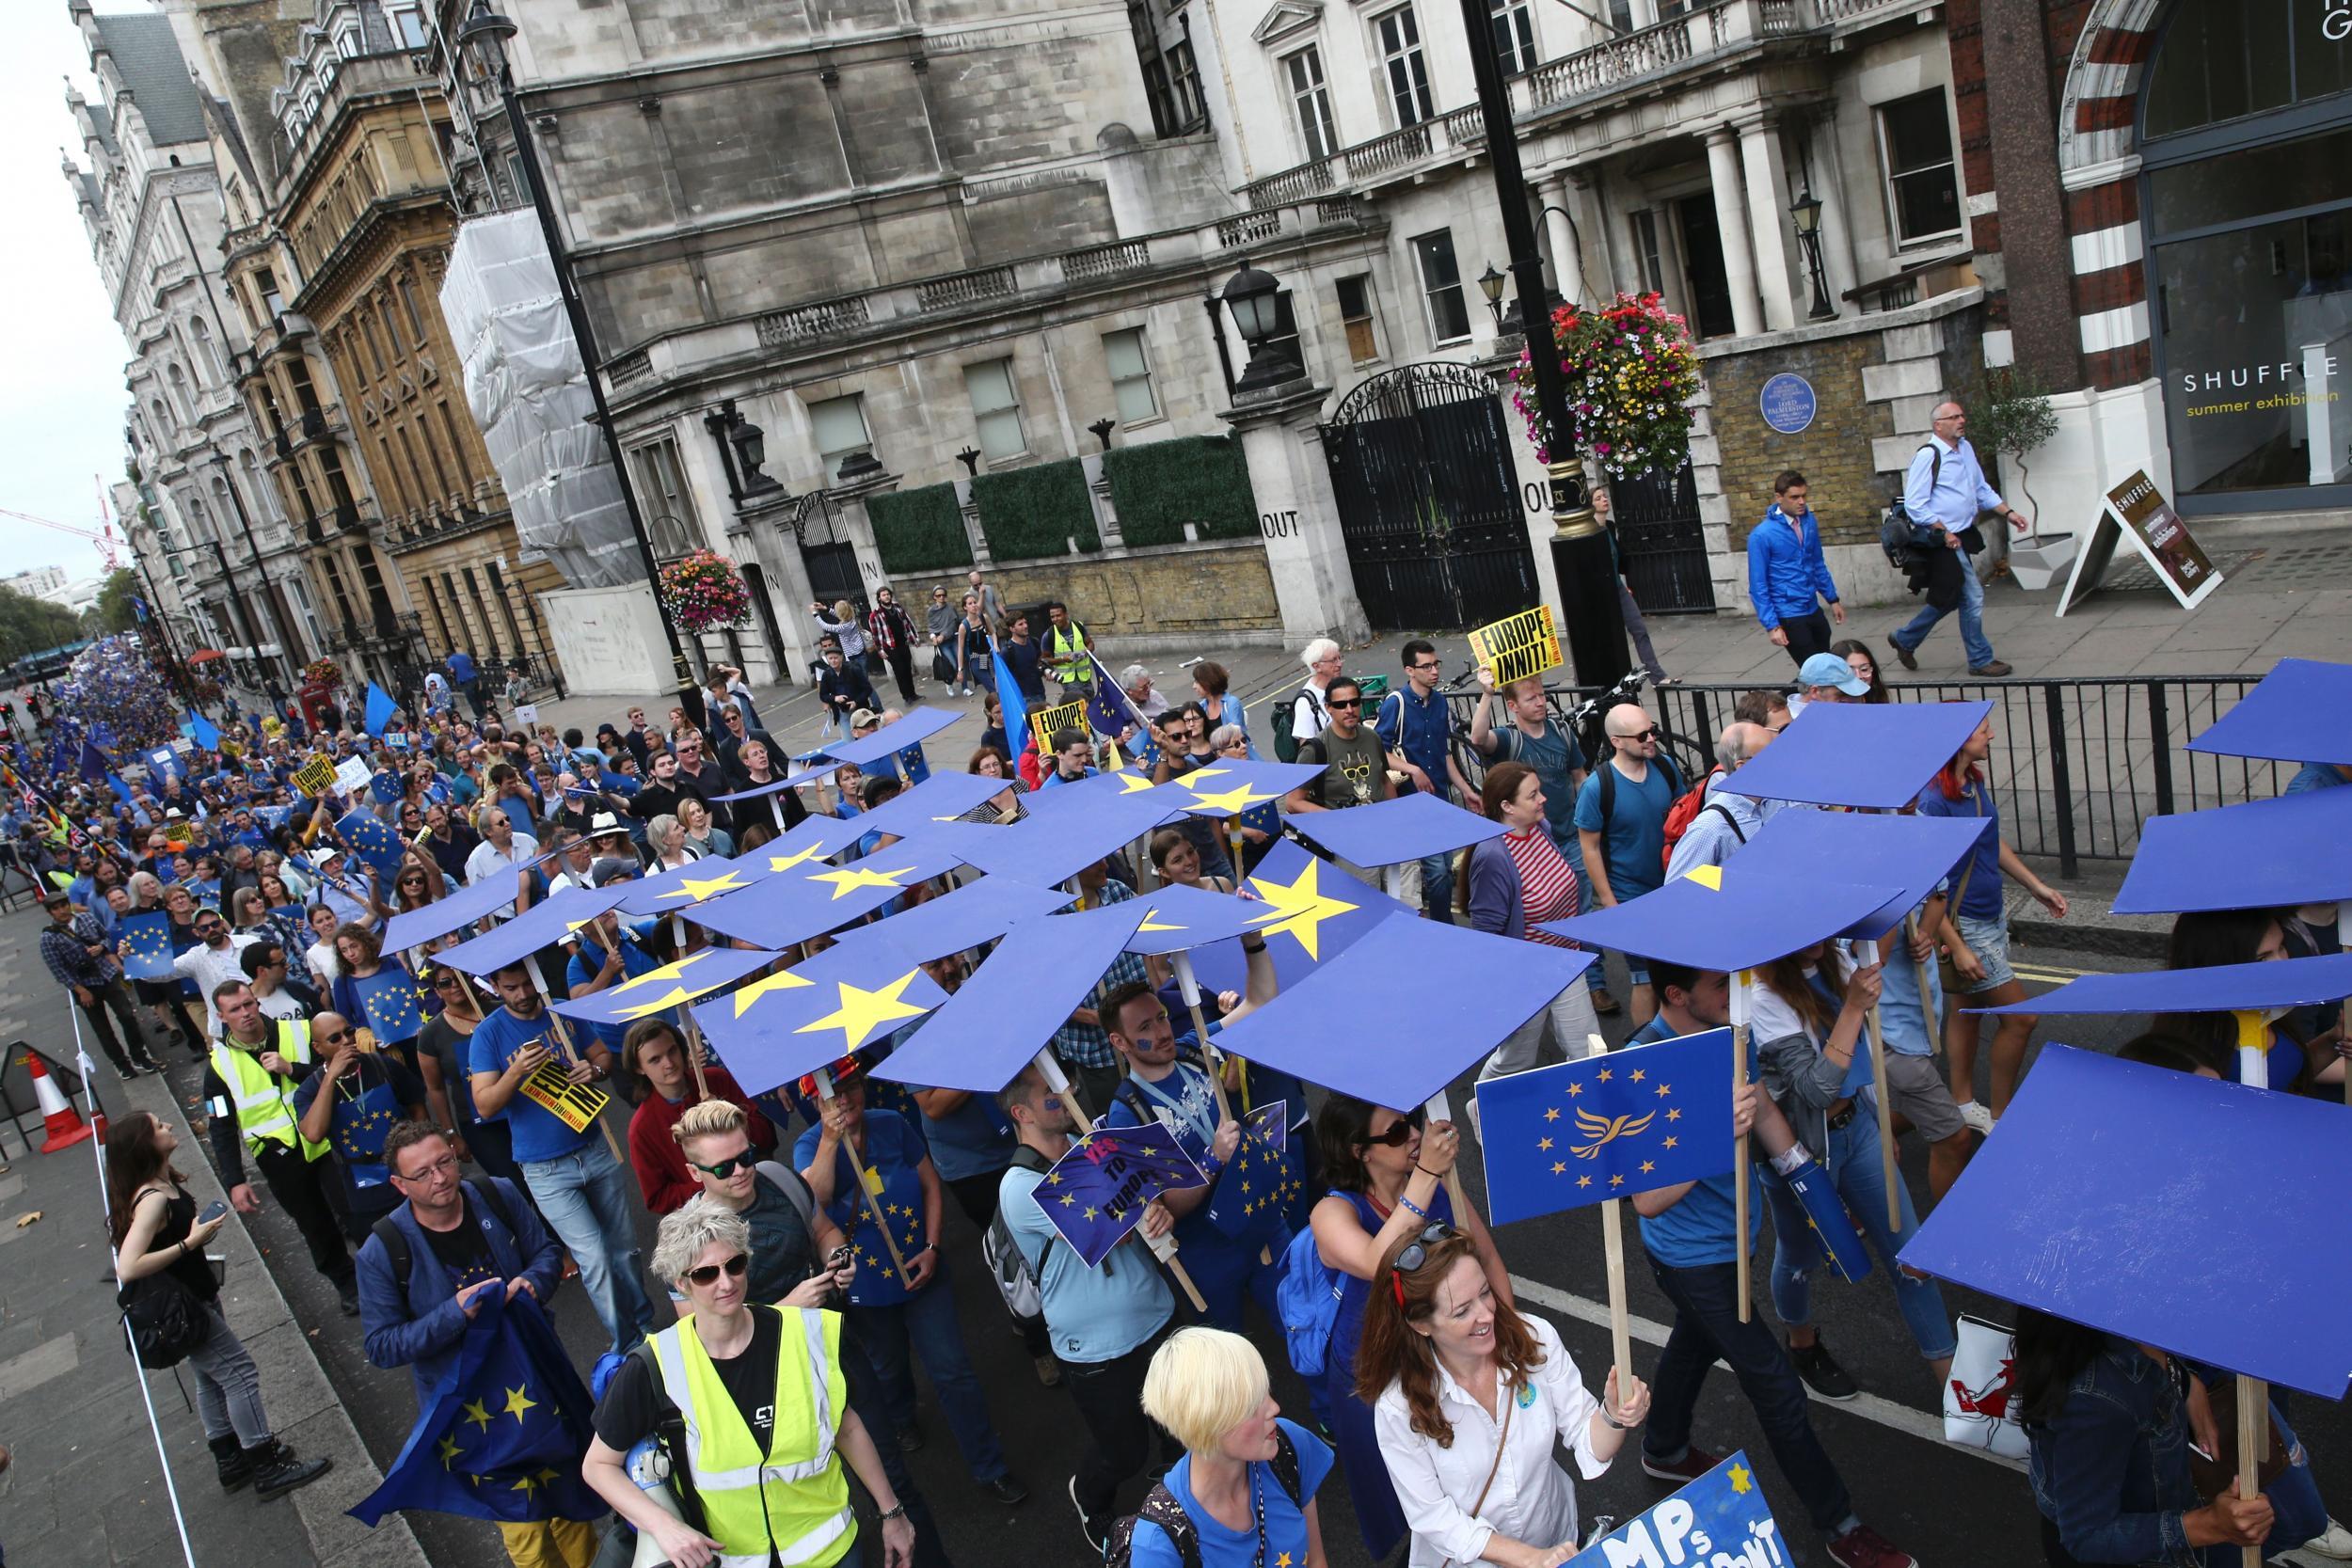 Previous pro-EU demonstrations such as this one in September have drawn thousands of people